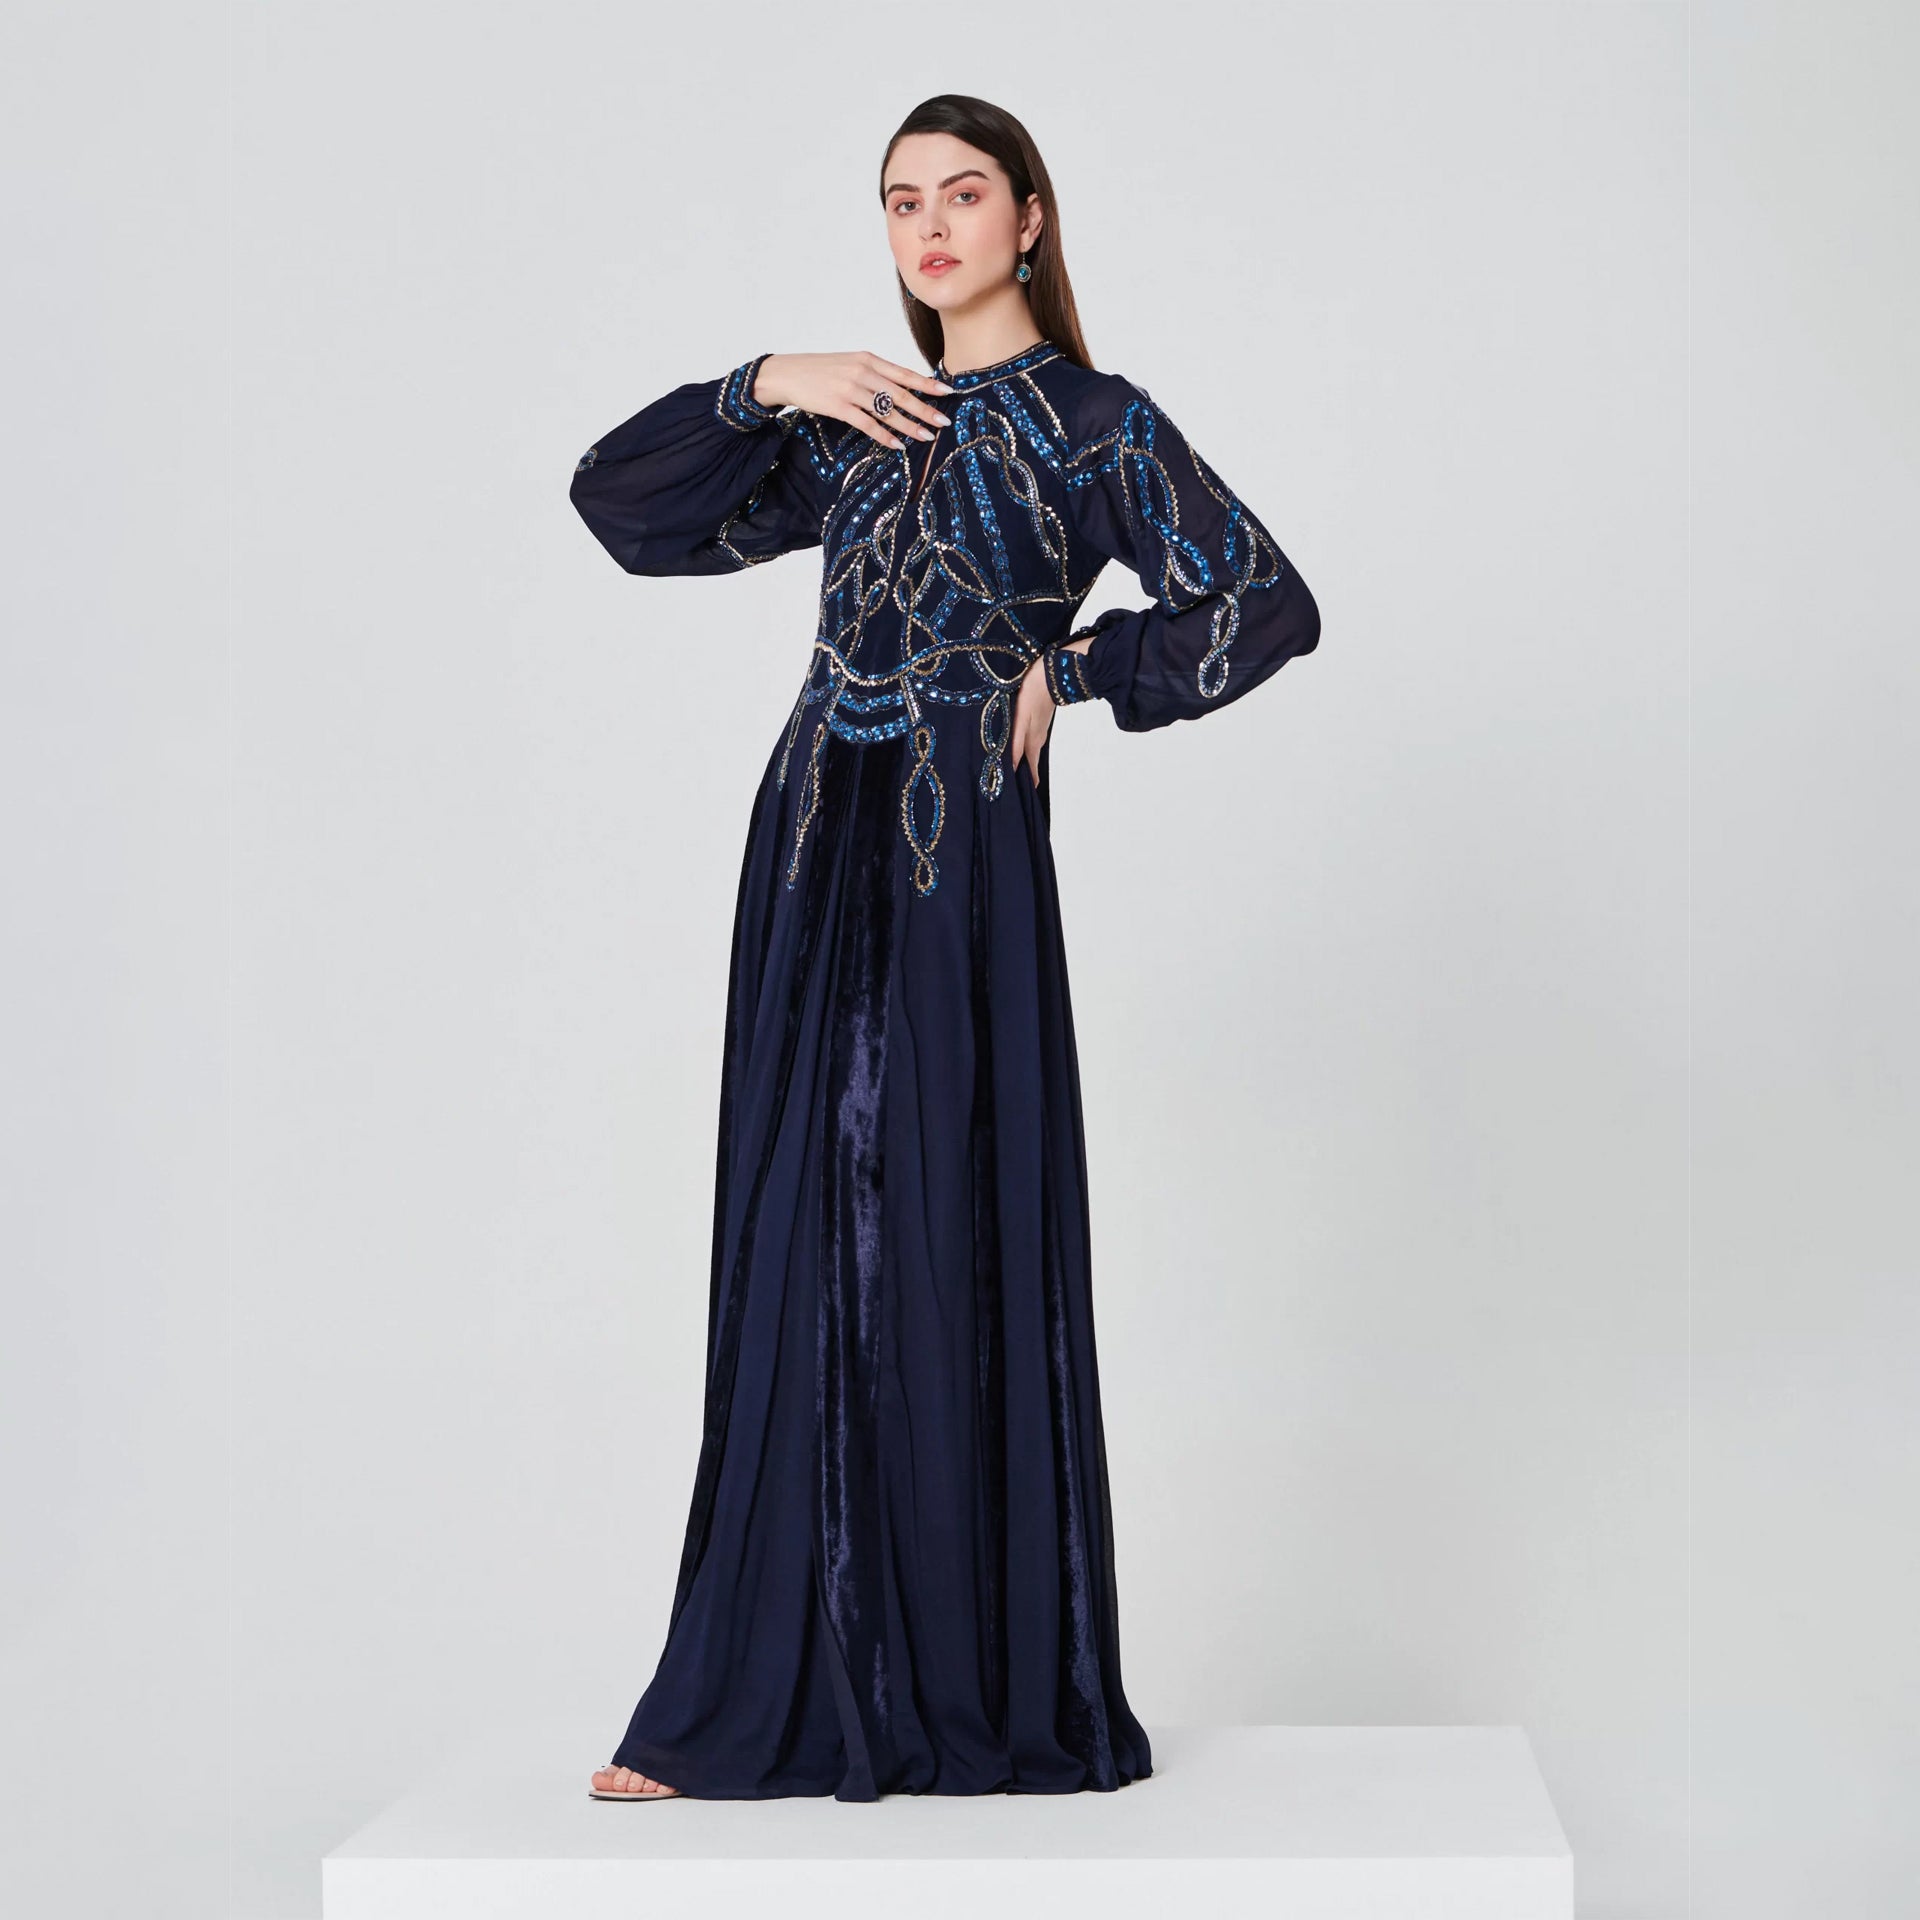 Navy Crepe Dress With Long Sleeves And Blue Embroidery From Shalky